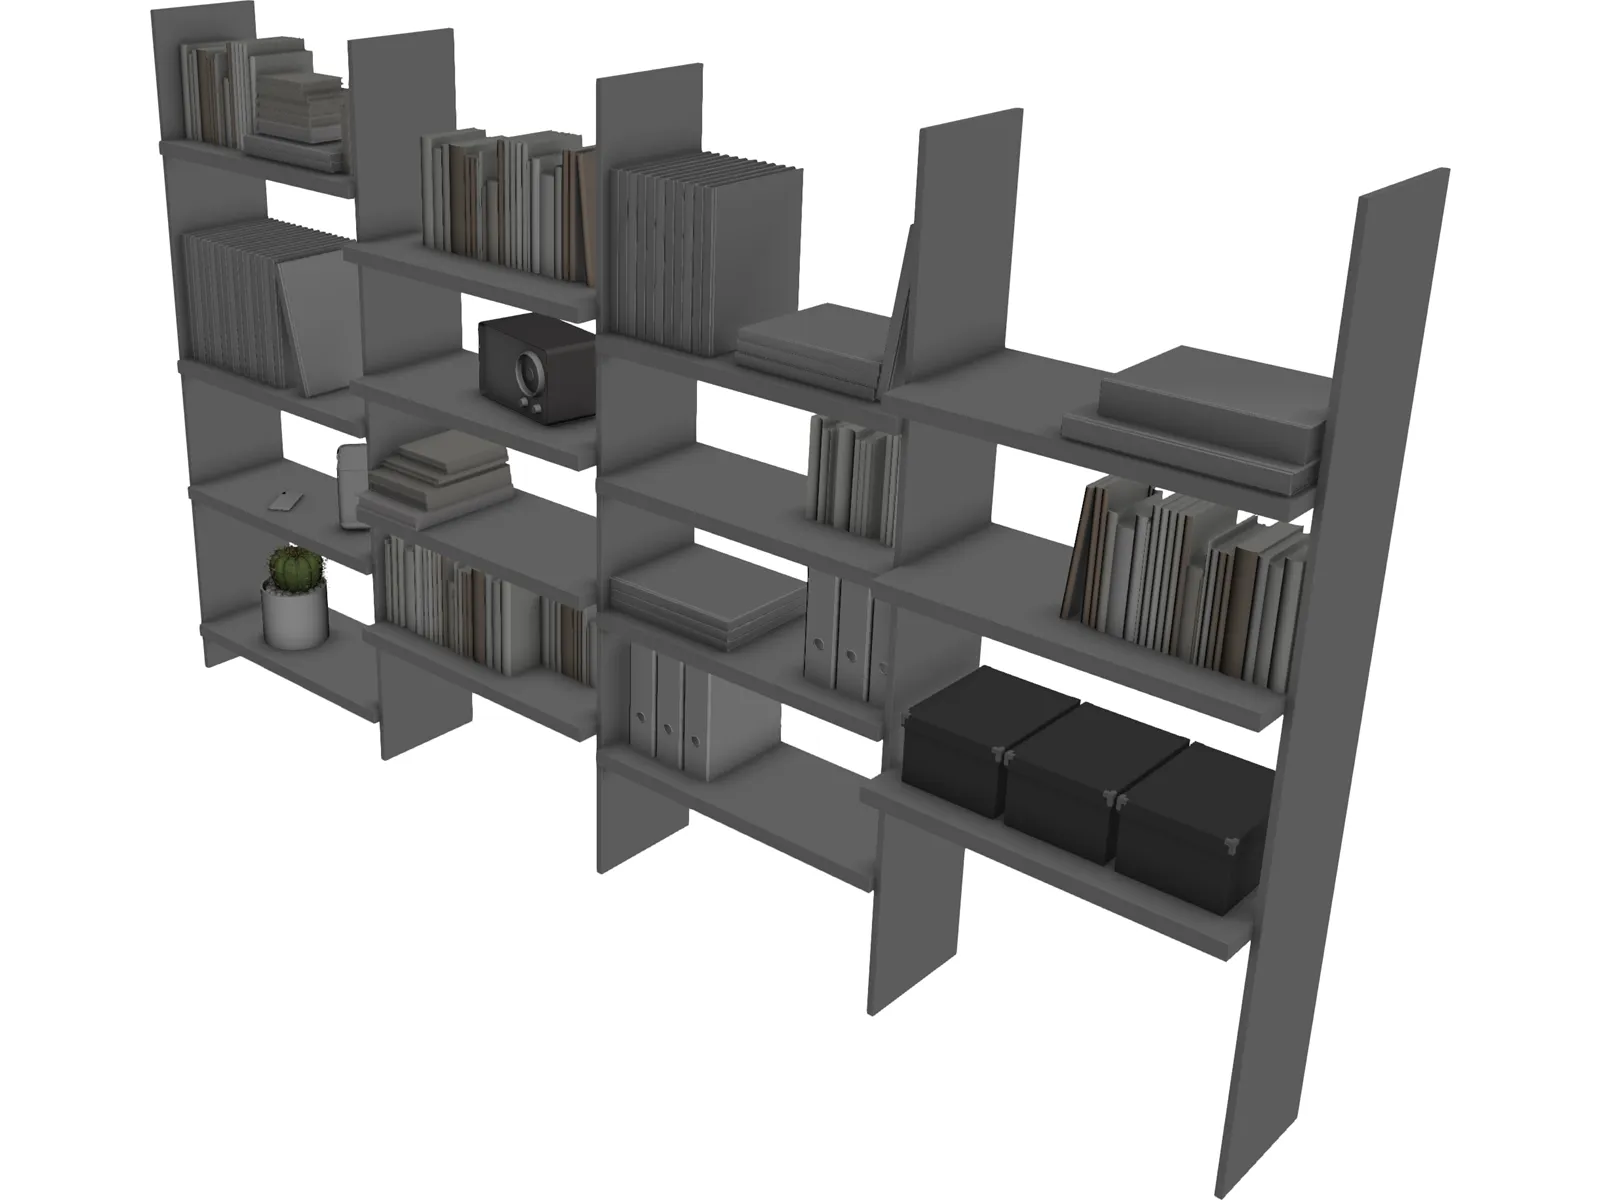 Storage Library 3D Model